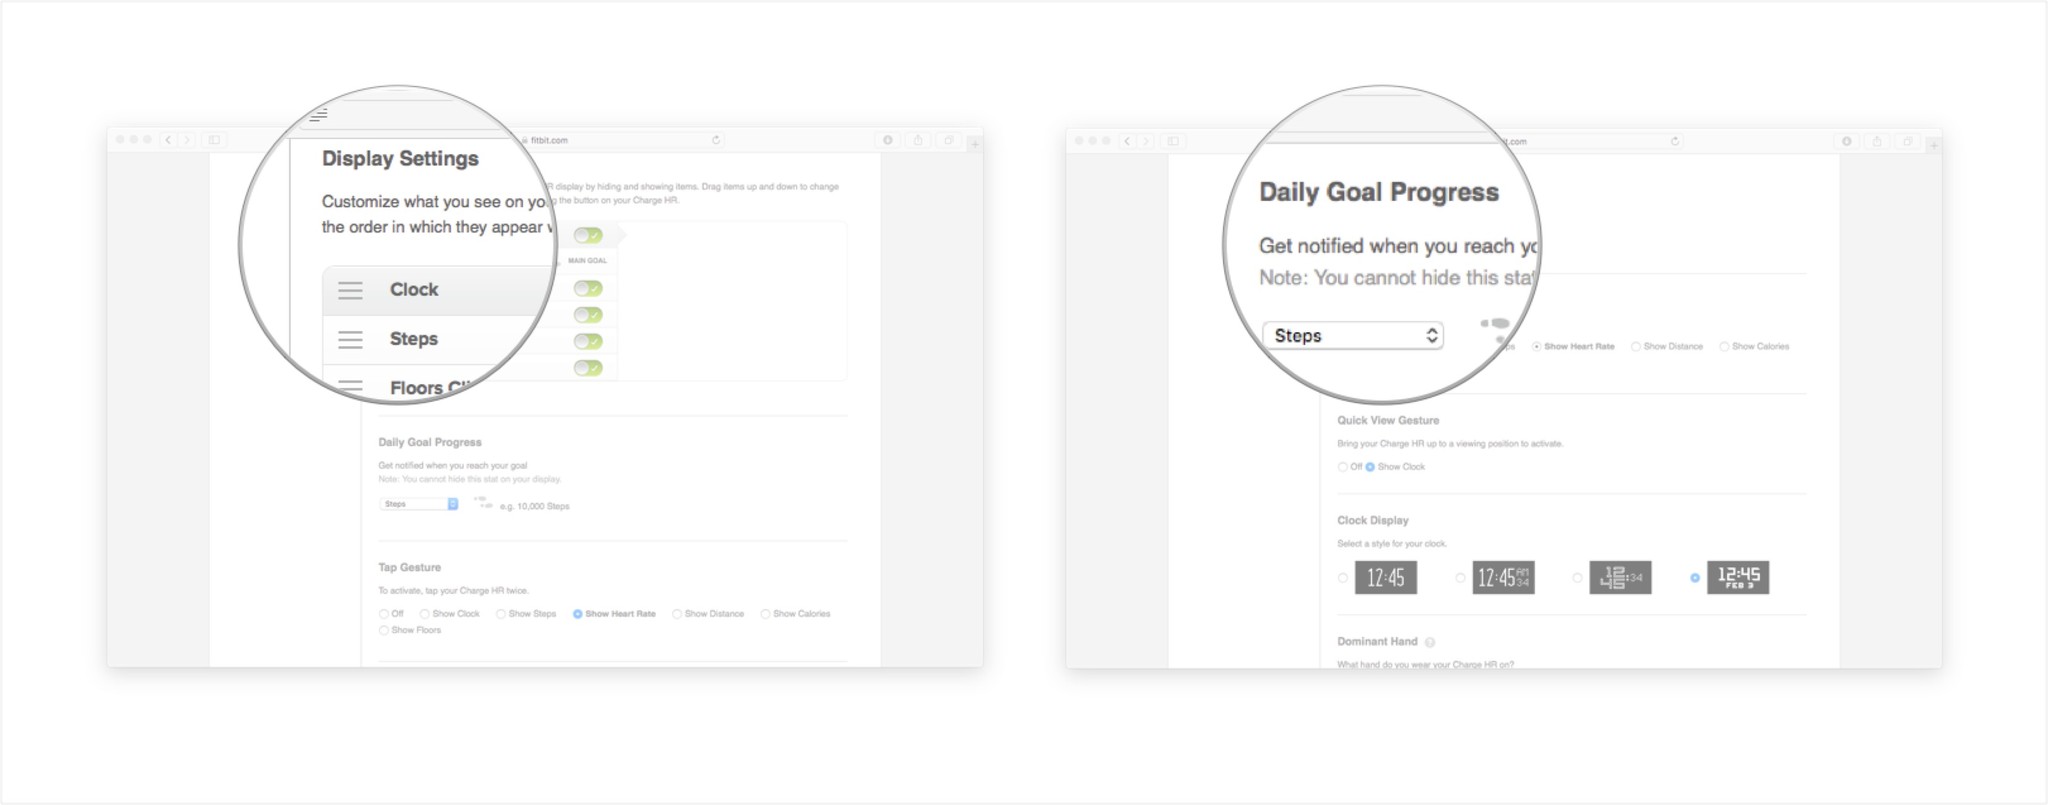 Manage on-screen data under Display Settings or manage achievement notifications under Daily Goal Progress.